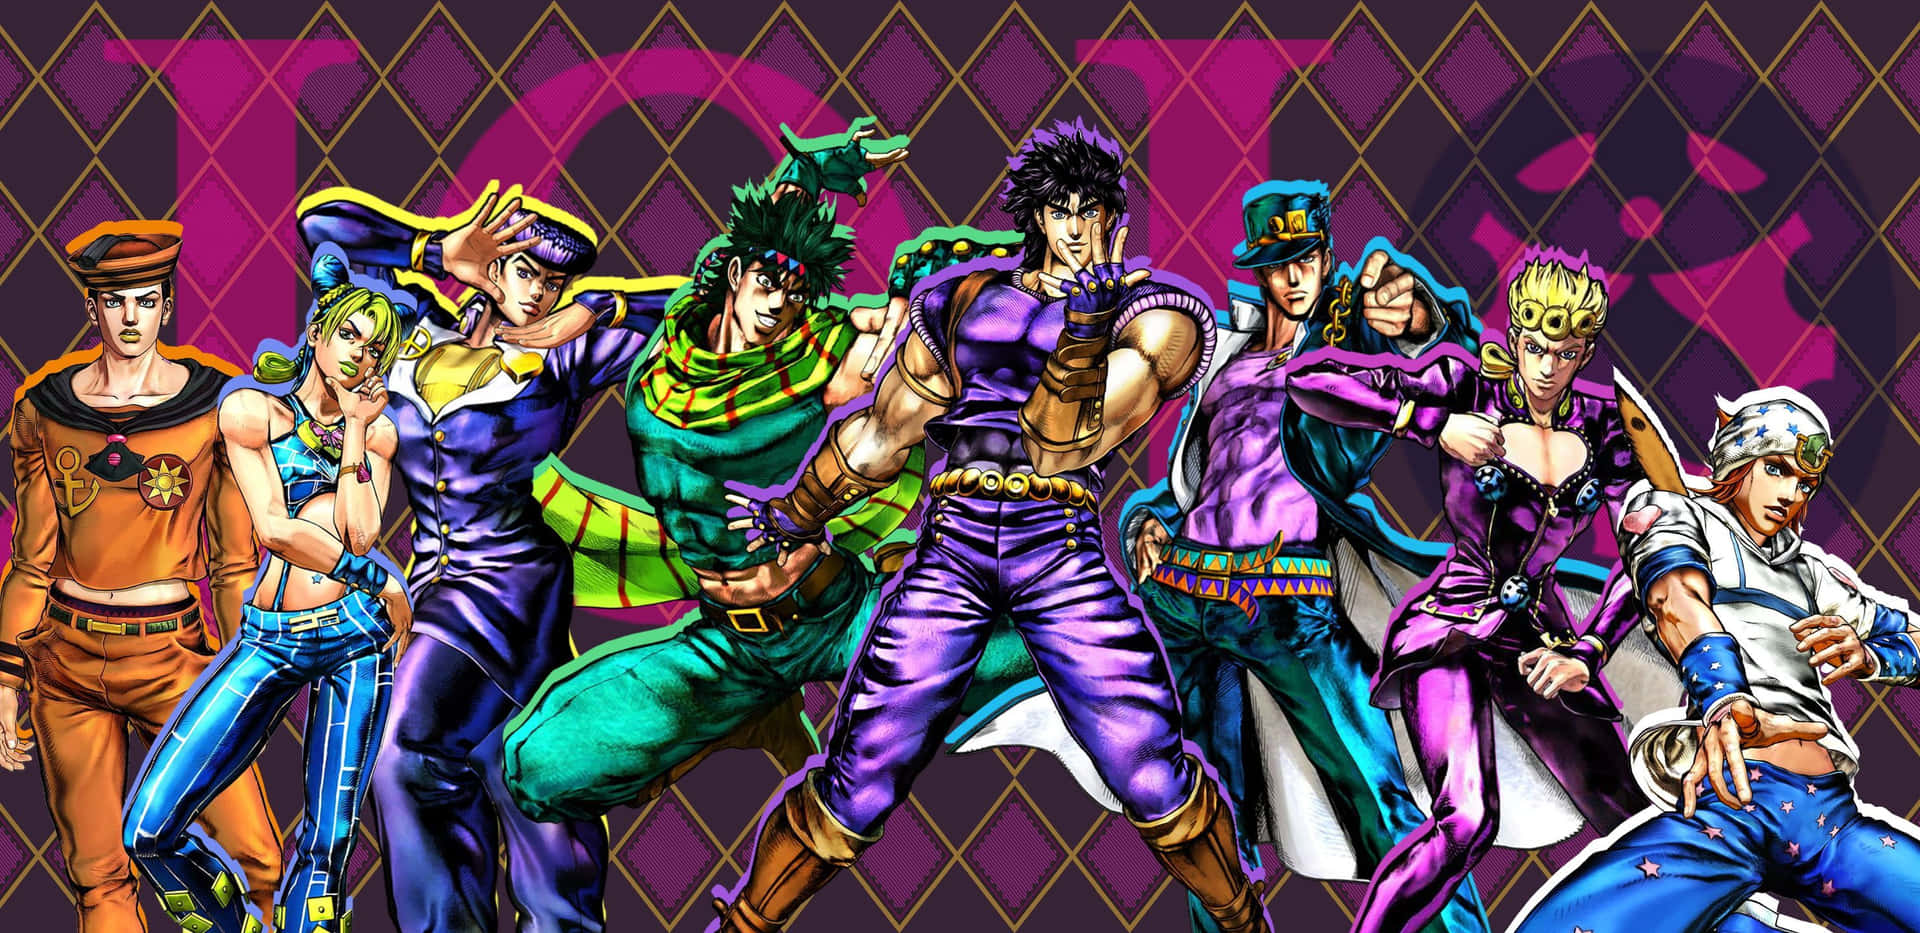 The Battle Tendency Heroes - Joestar and Companions Wallpaper